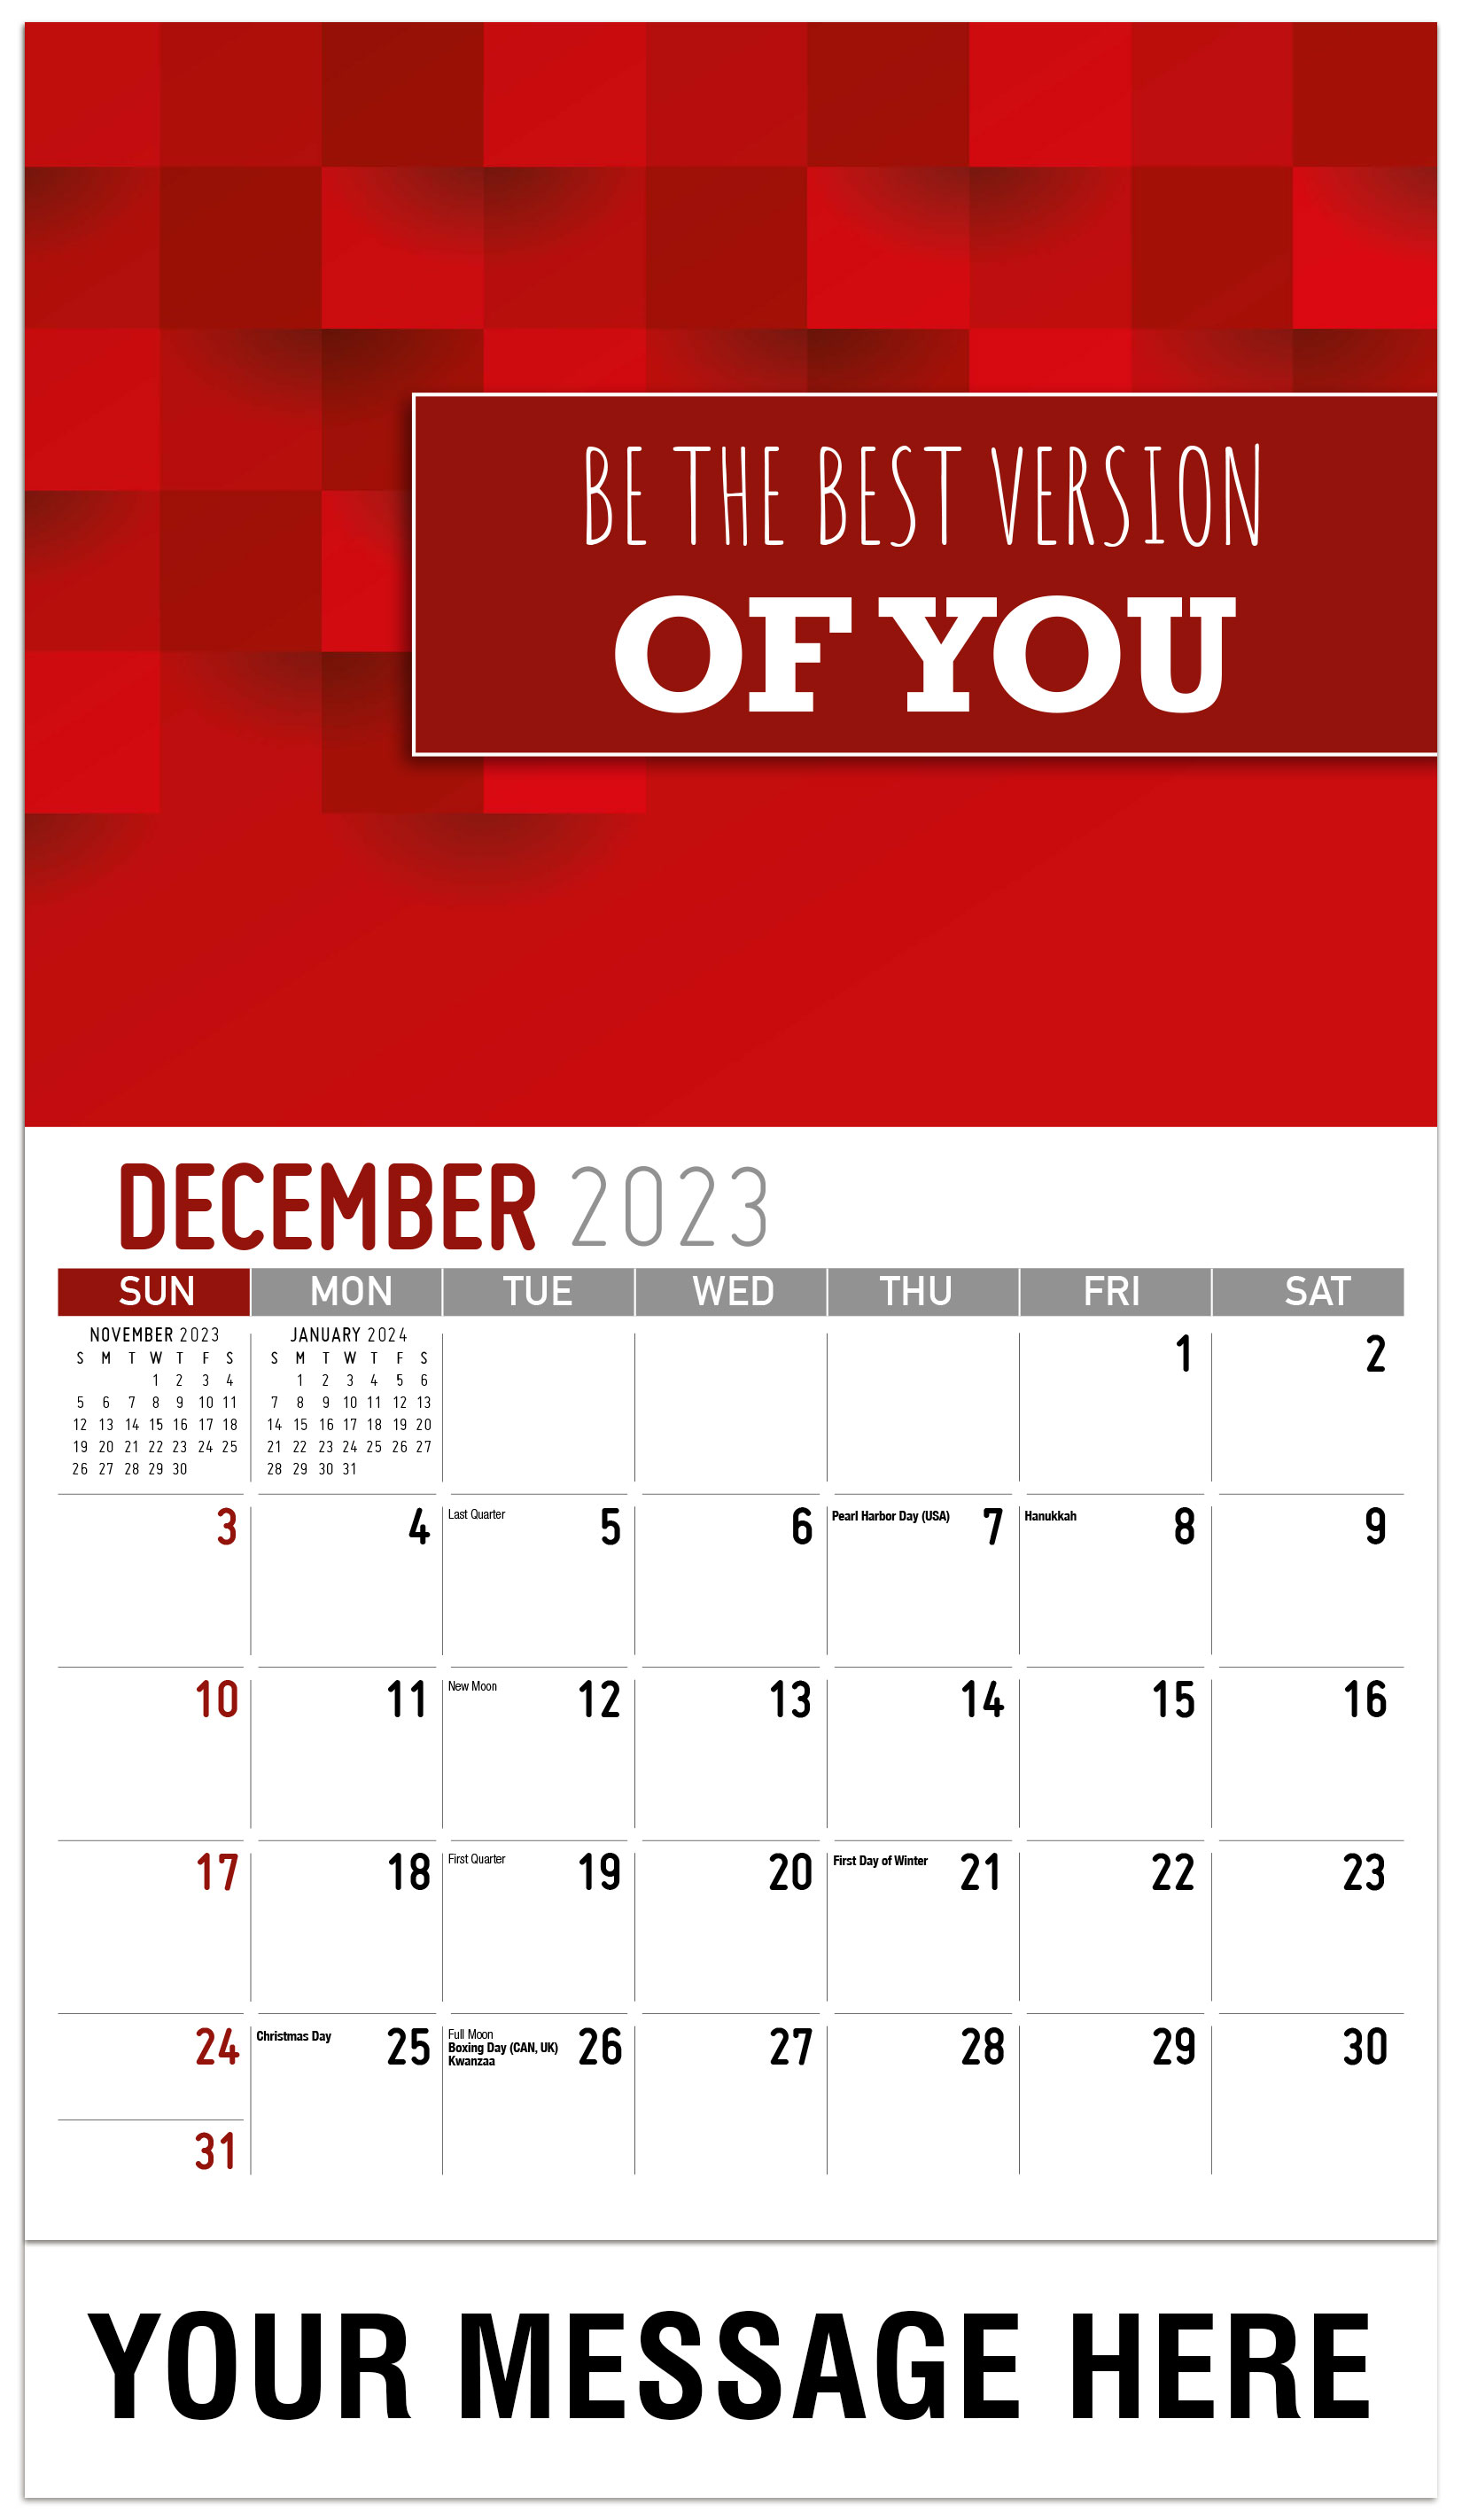 Be The Best Version 
Of You - December 2023 - Arts and Thoughts 2023 Promotional Calendar